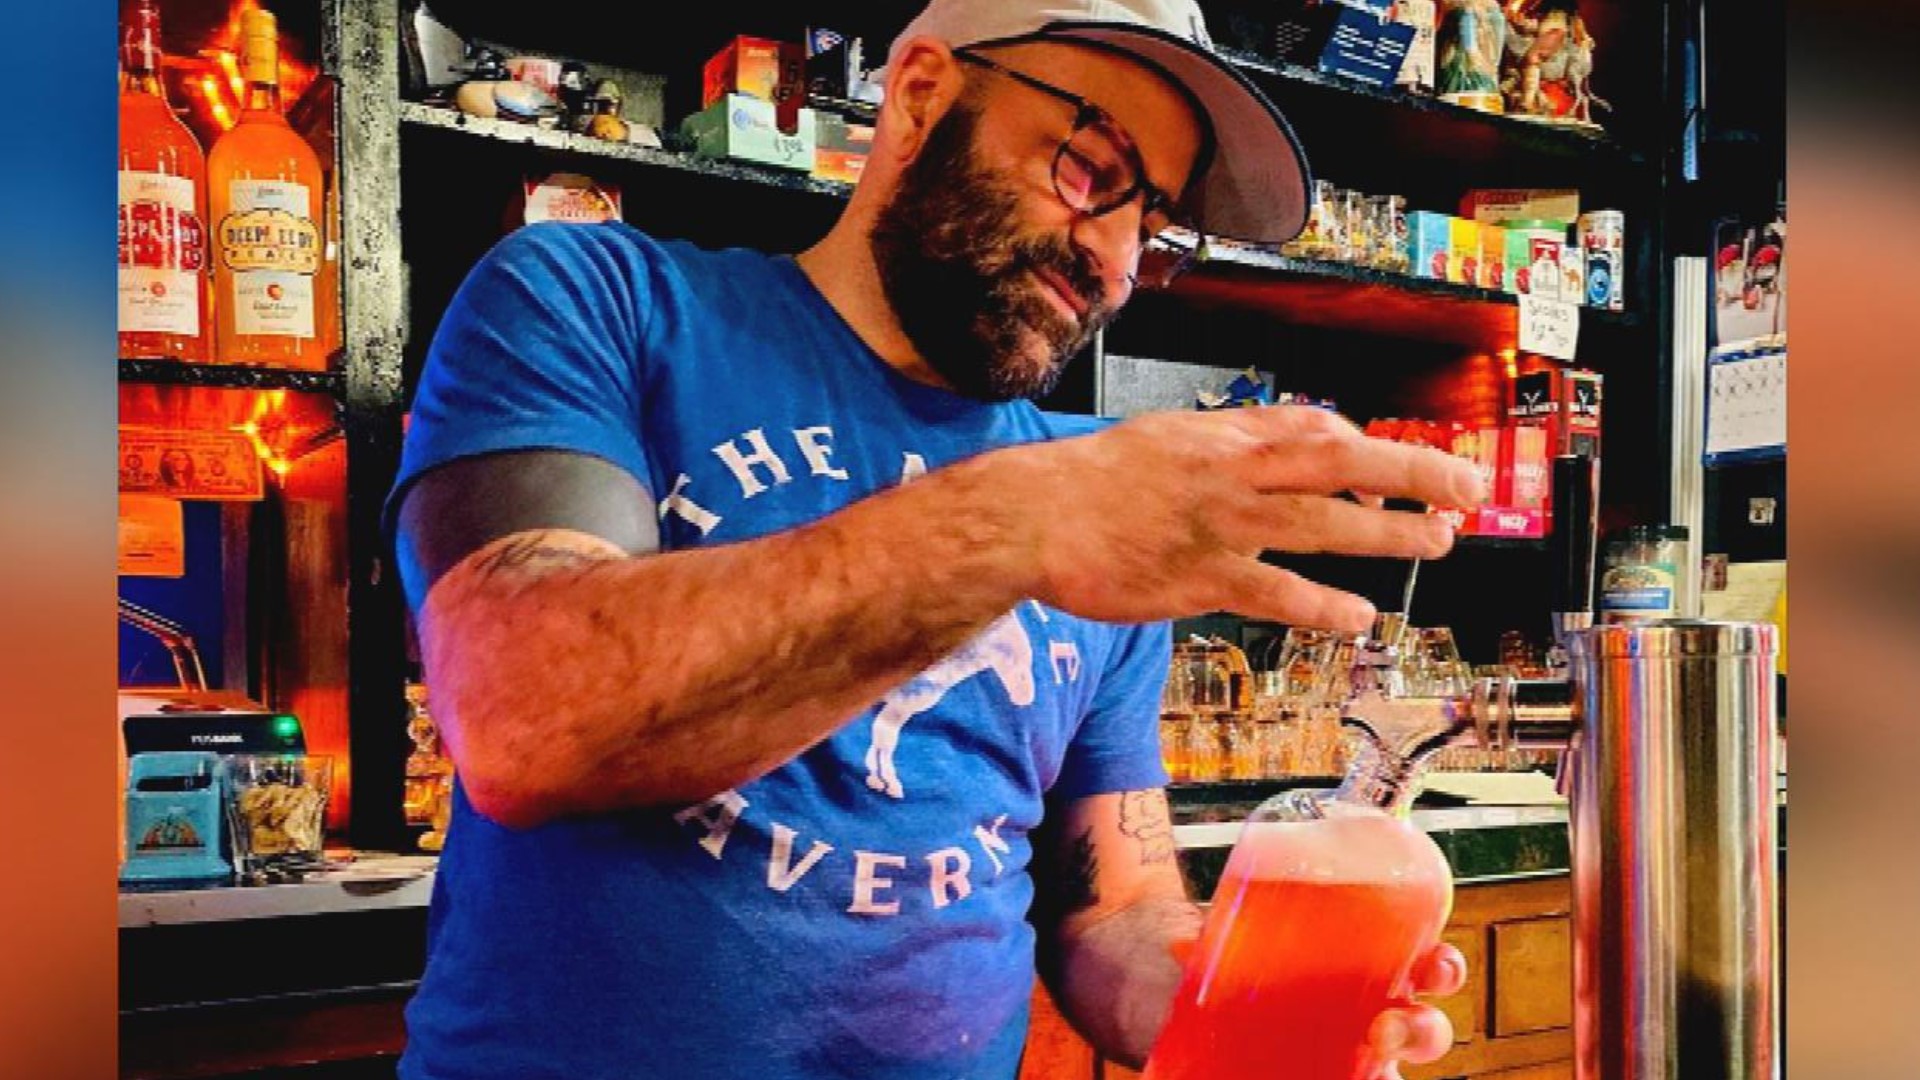 The Mule Tavern is using social media to share its secrets when it comes to mixed drinks.